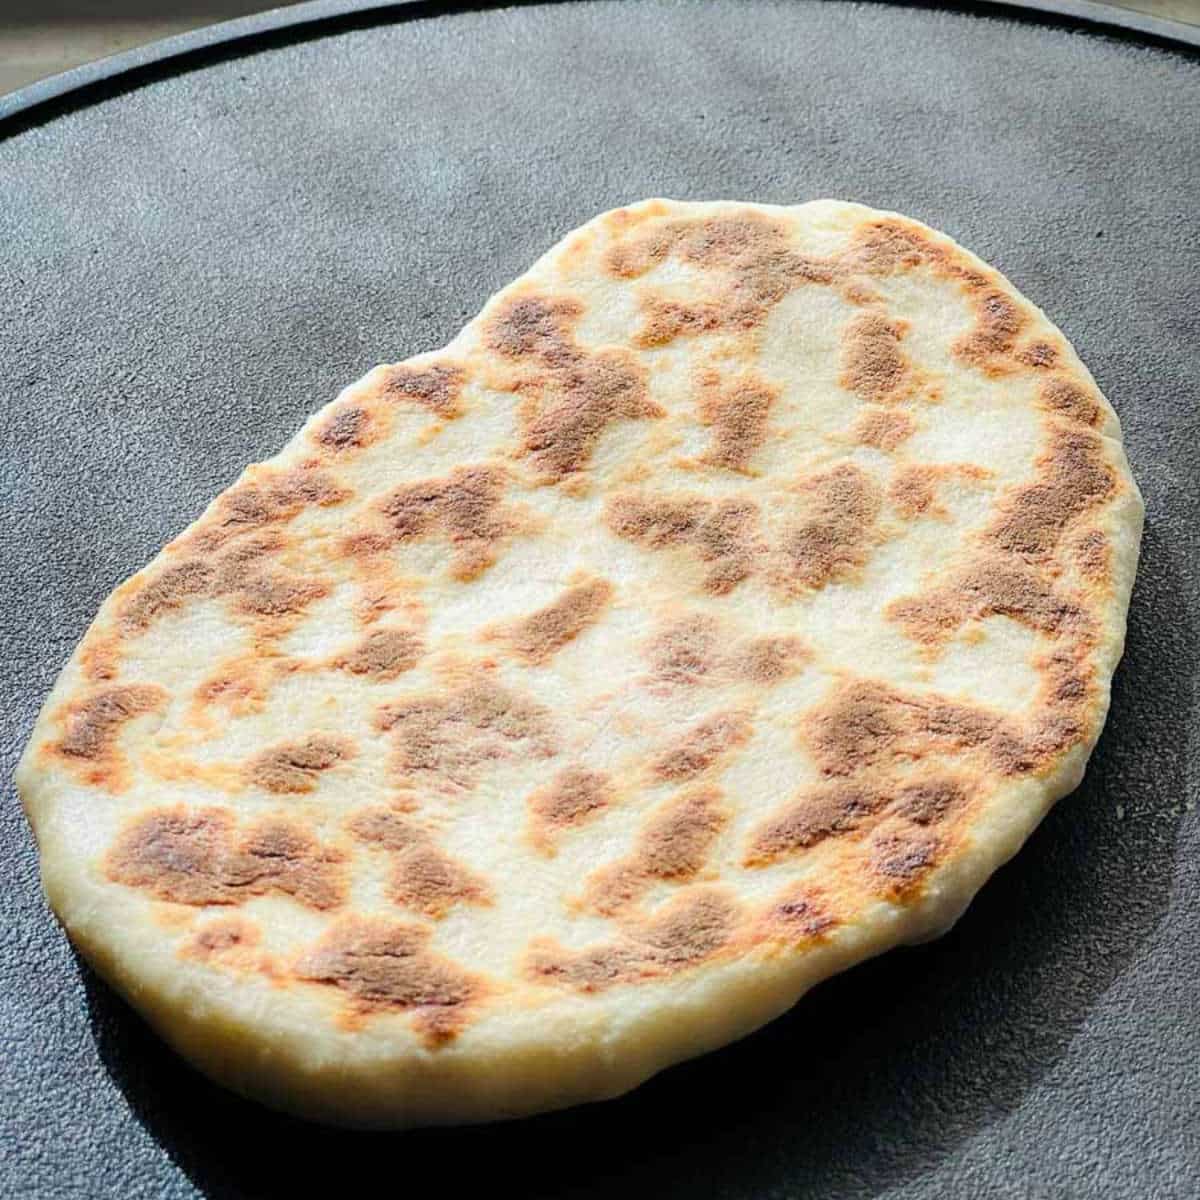 Flipped naan to cook both sides.